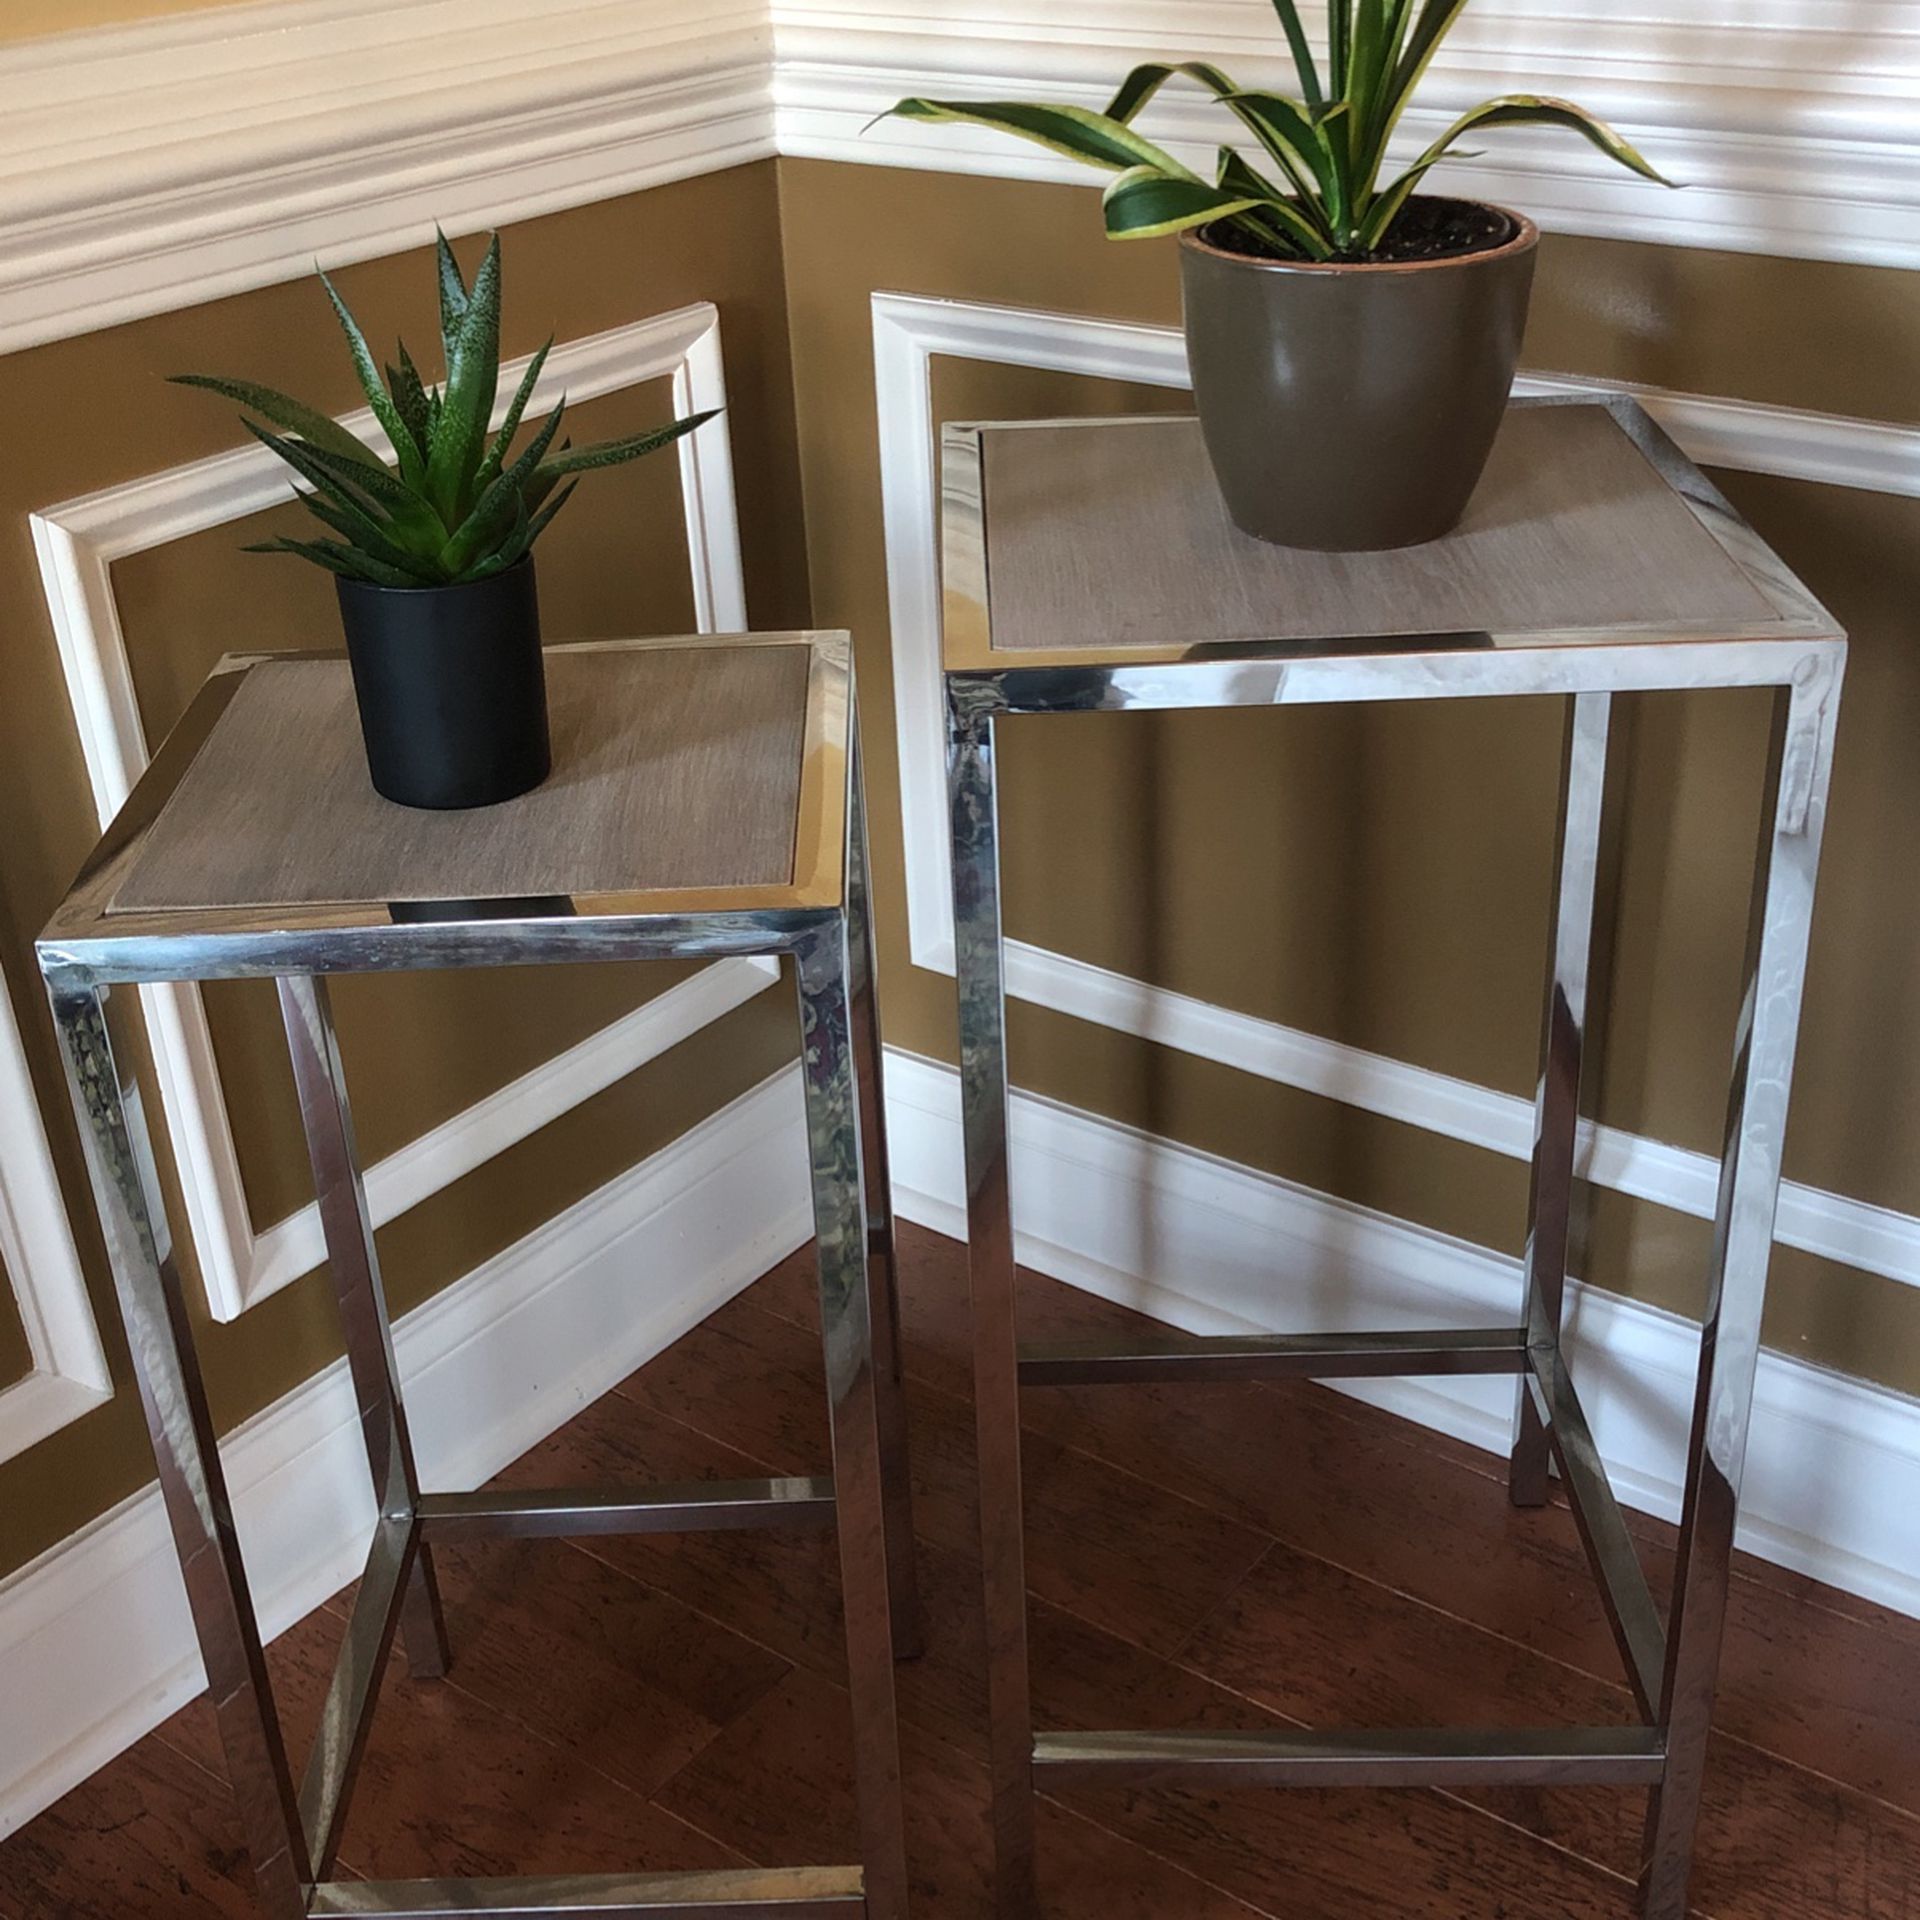 2 tables with chrome legs and grayish wood tops